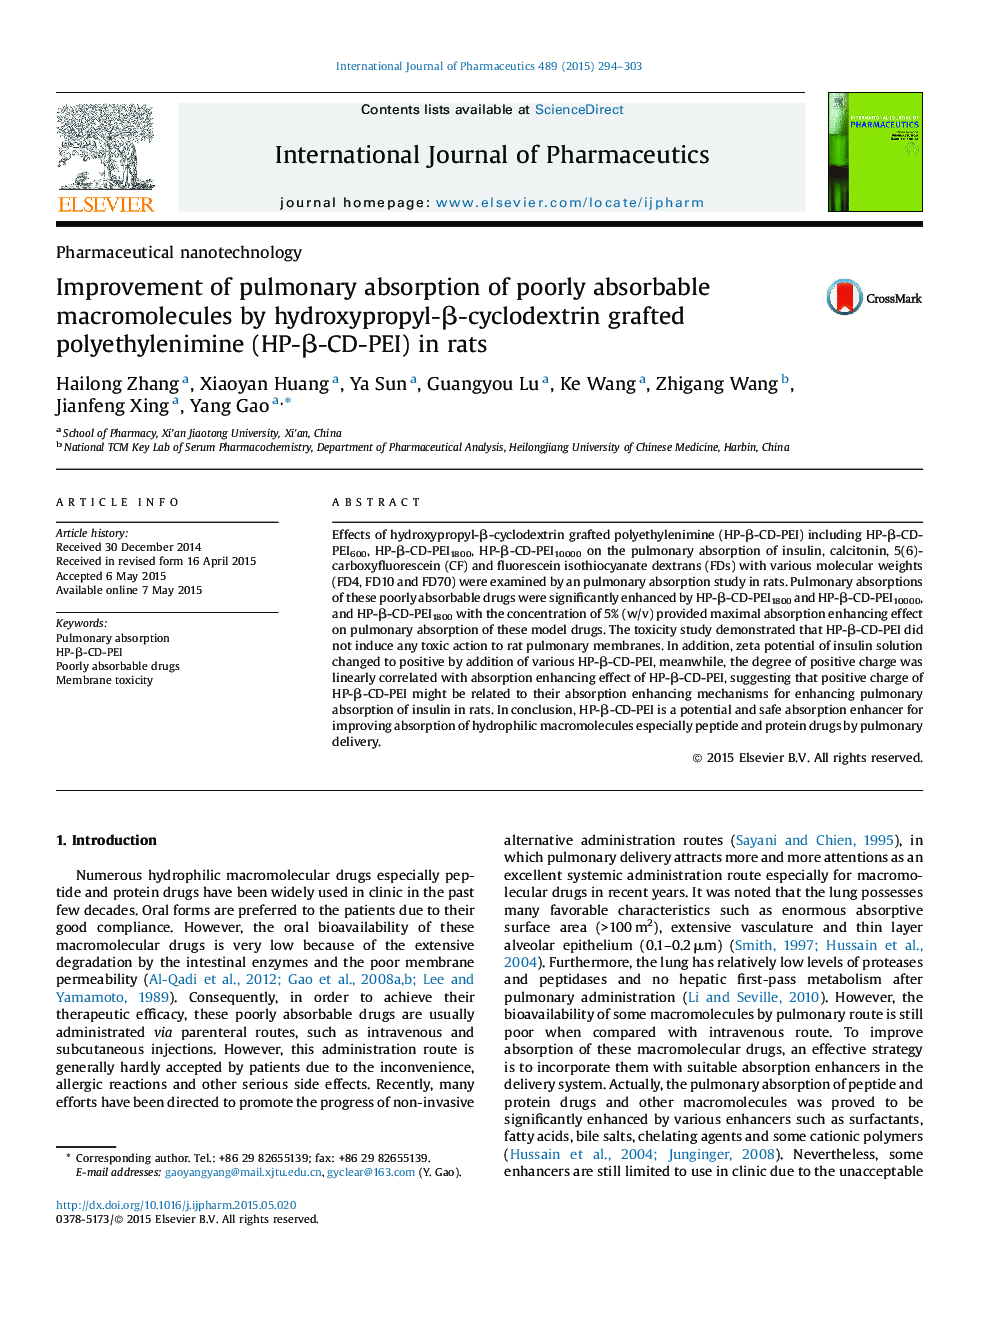 Improvement of pulmonary absorption of poorly absorbable macromolecules by hydroxypropyl-β-cyclodextrin grafted polyethylenimine (HP-β-CD-PEI) in rats